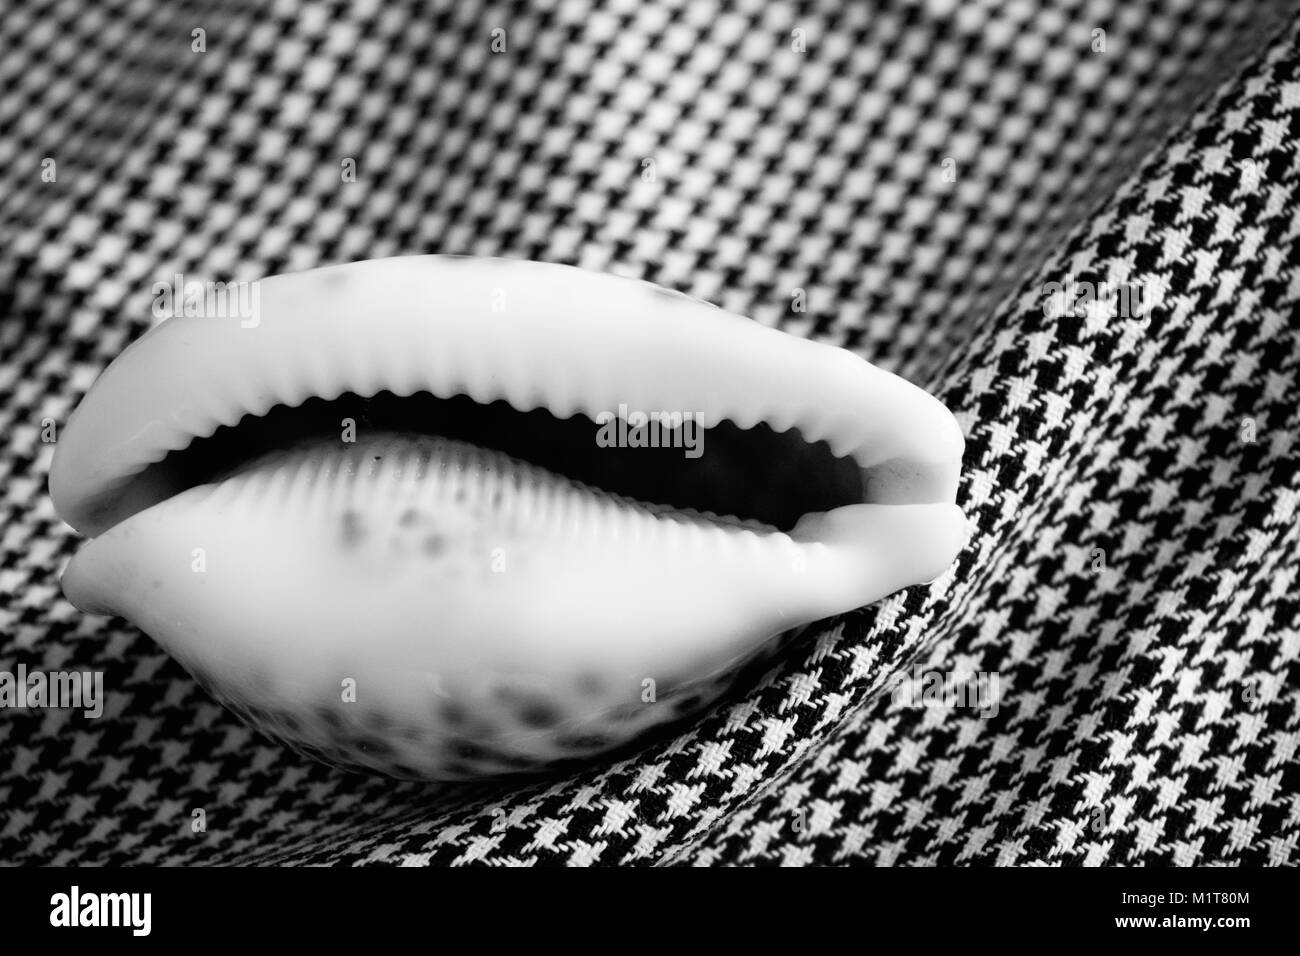 Shell of Tiger cowrie (Cypraea tigris) on the textile background, black and white Stock Photo